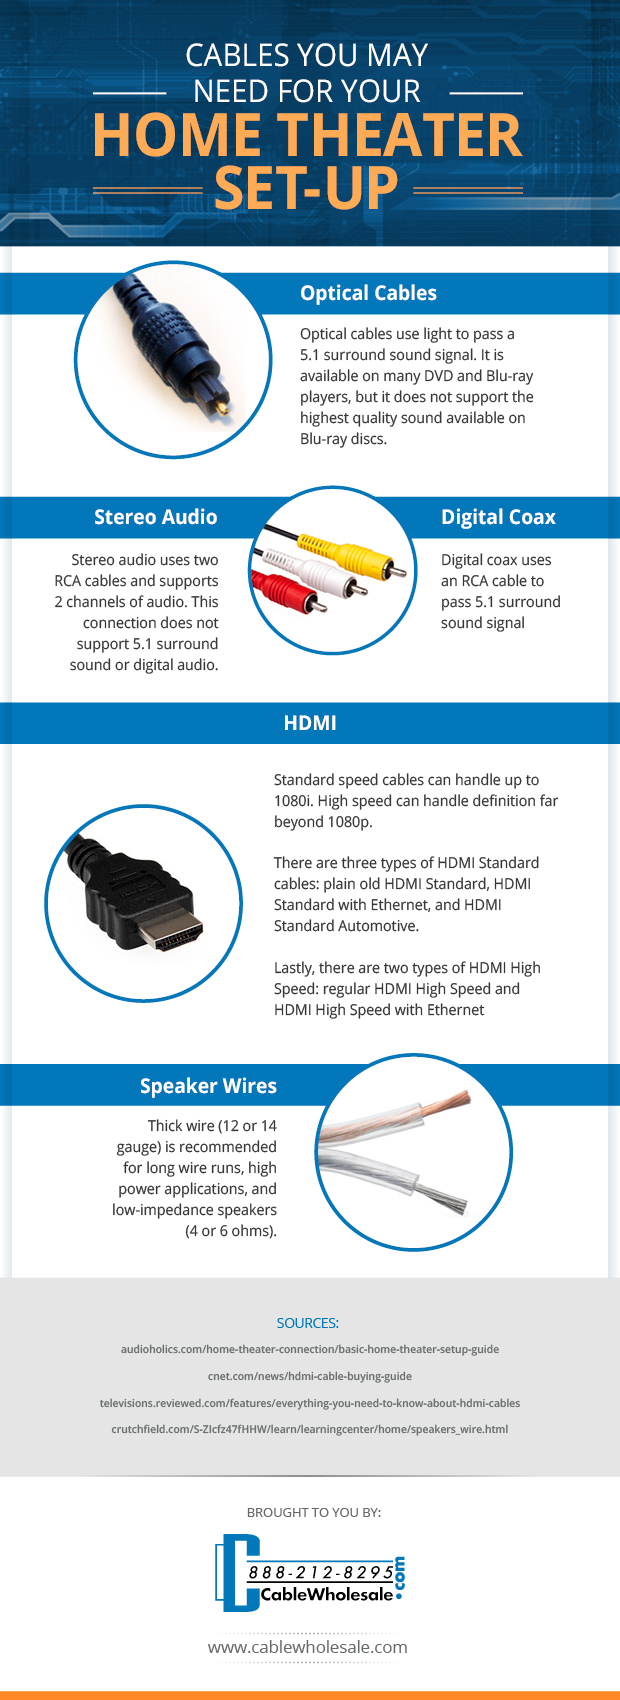 Cables You May Need For Your Home Theater Set-Up